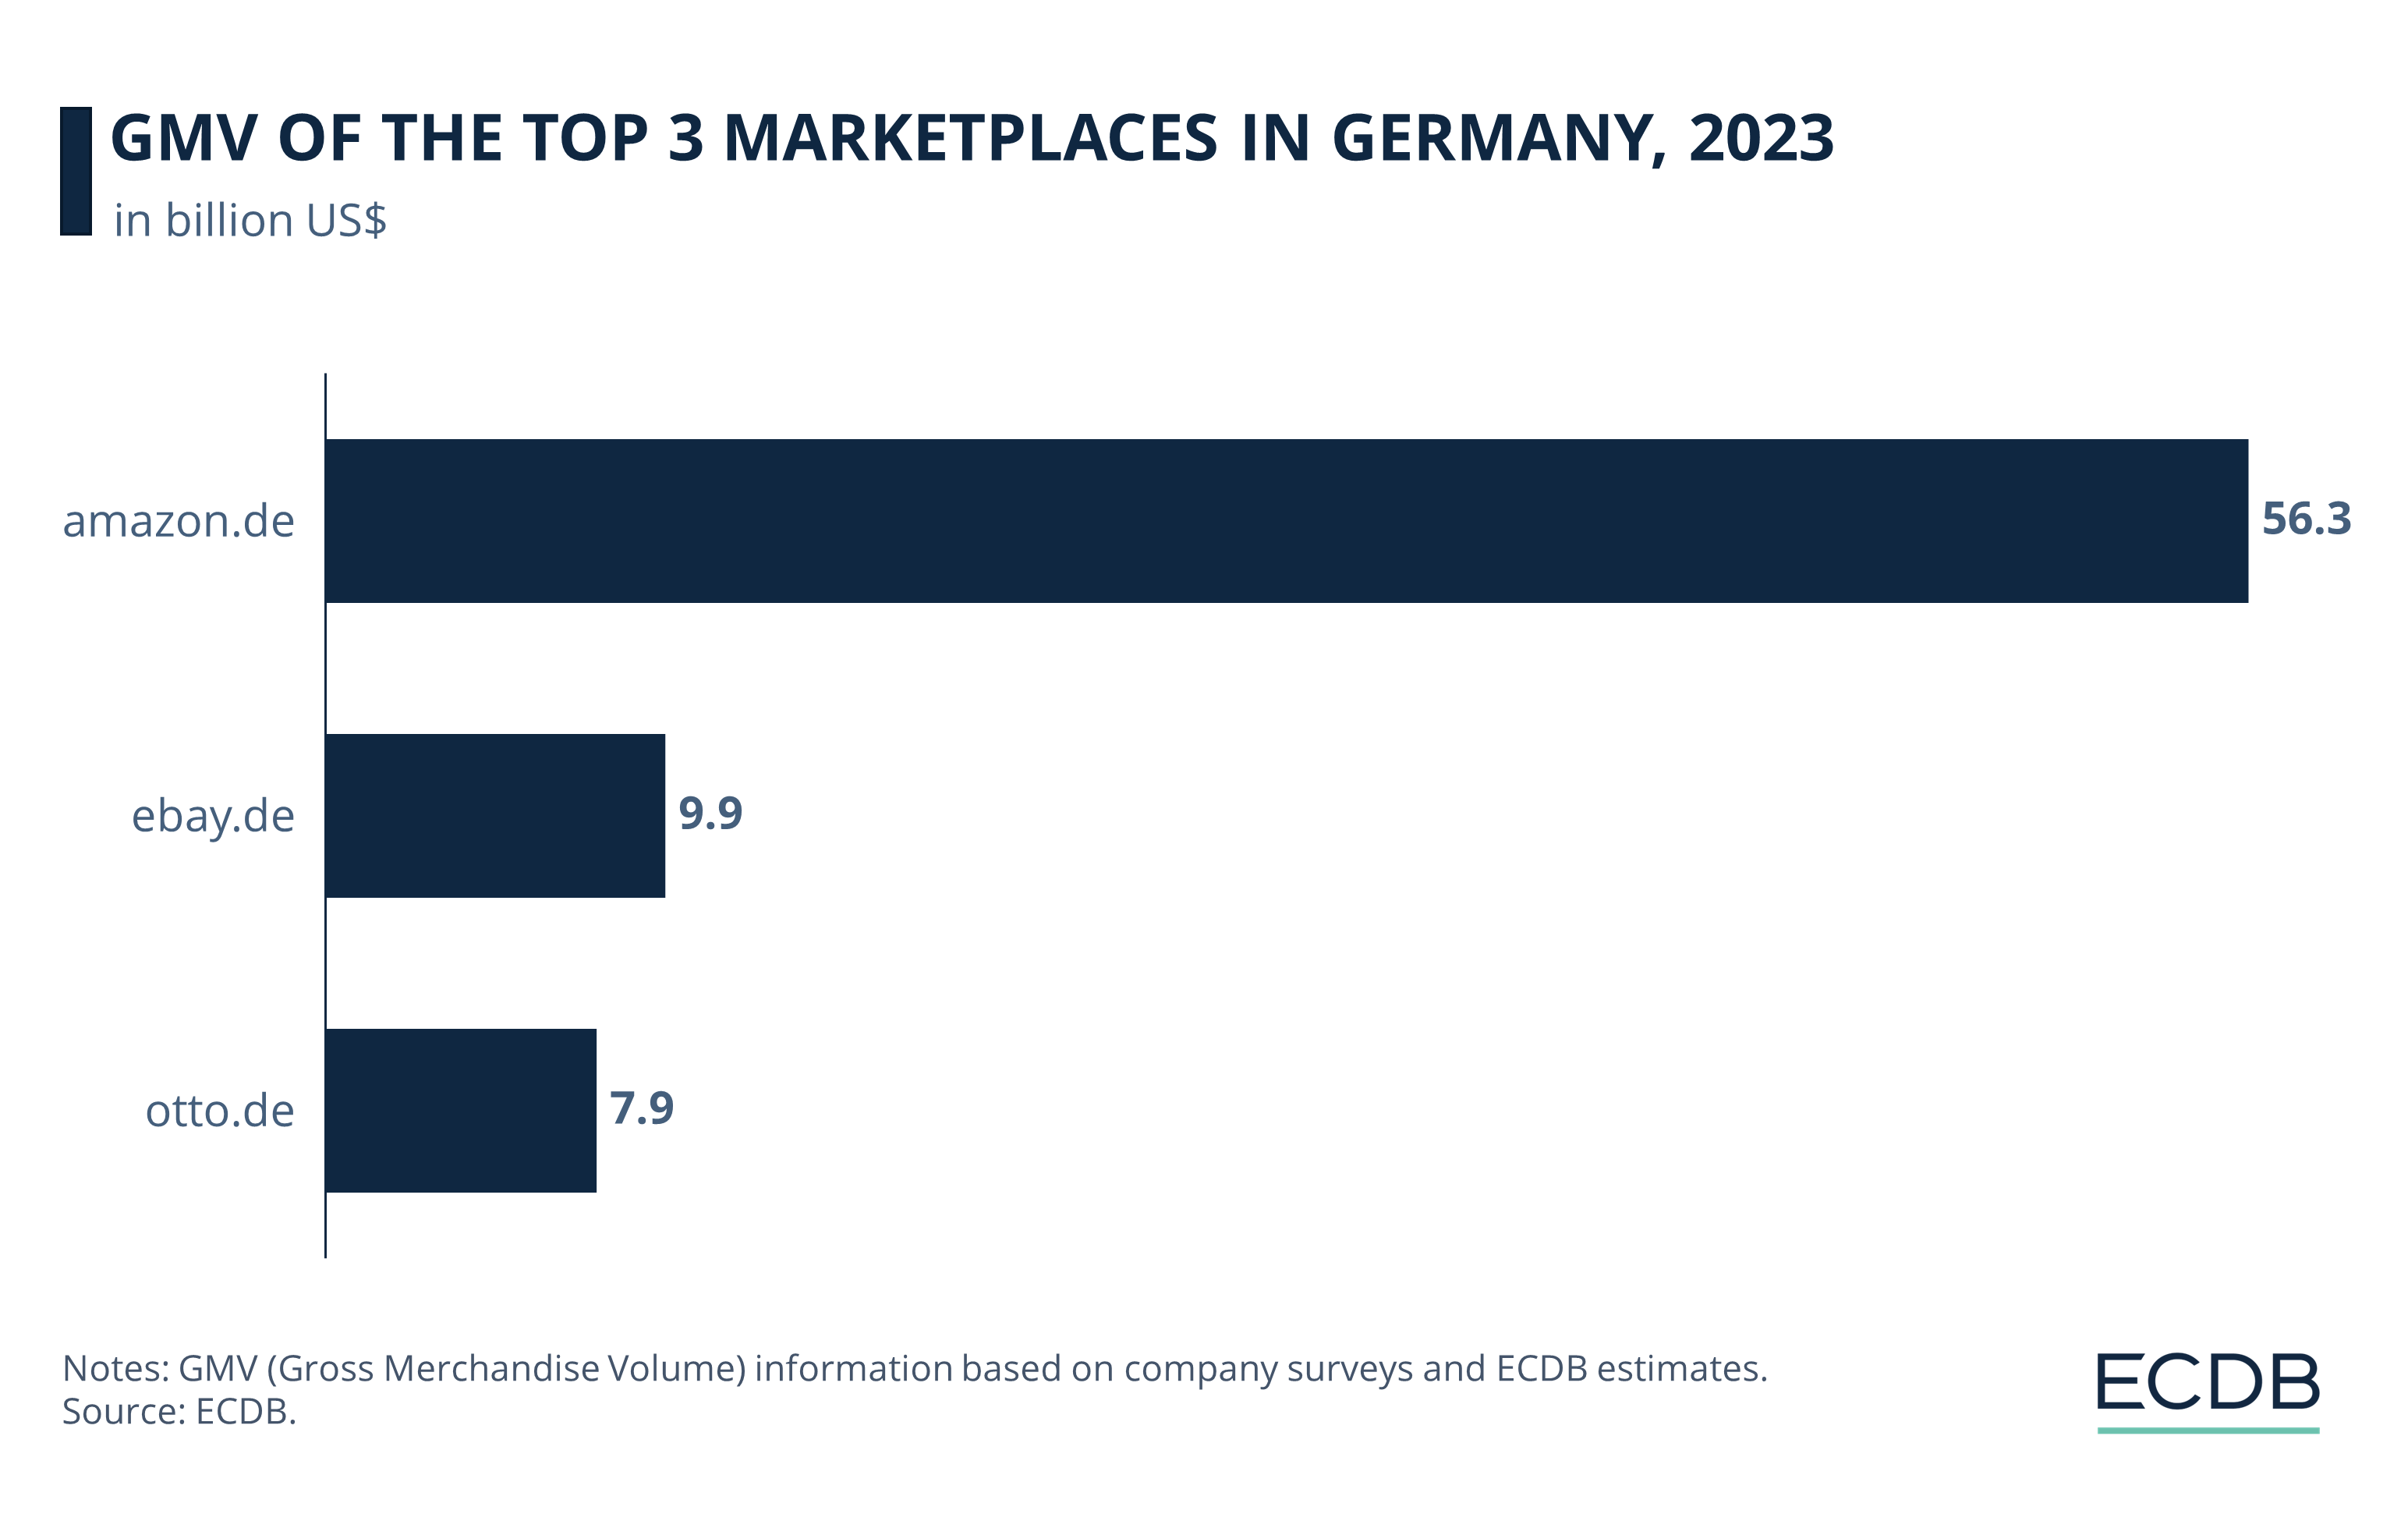 GMV of the Top Three Marketplaces in Germany in 2022